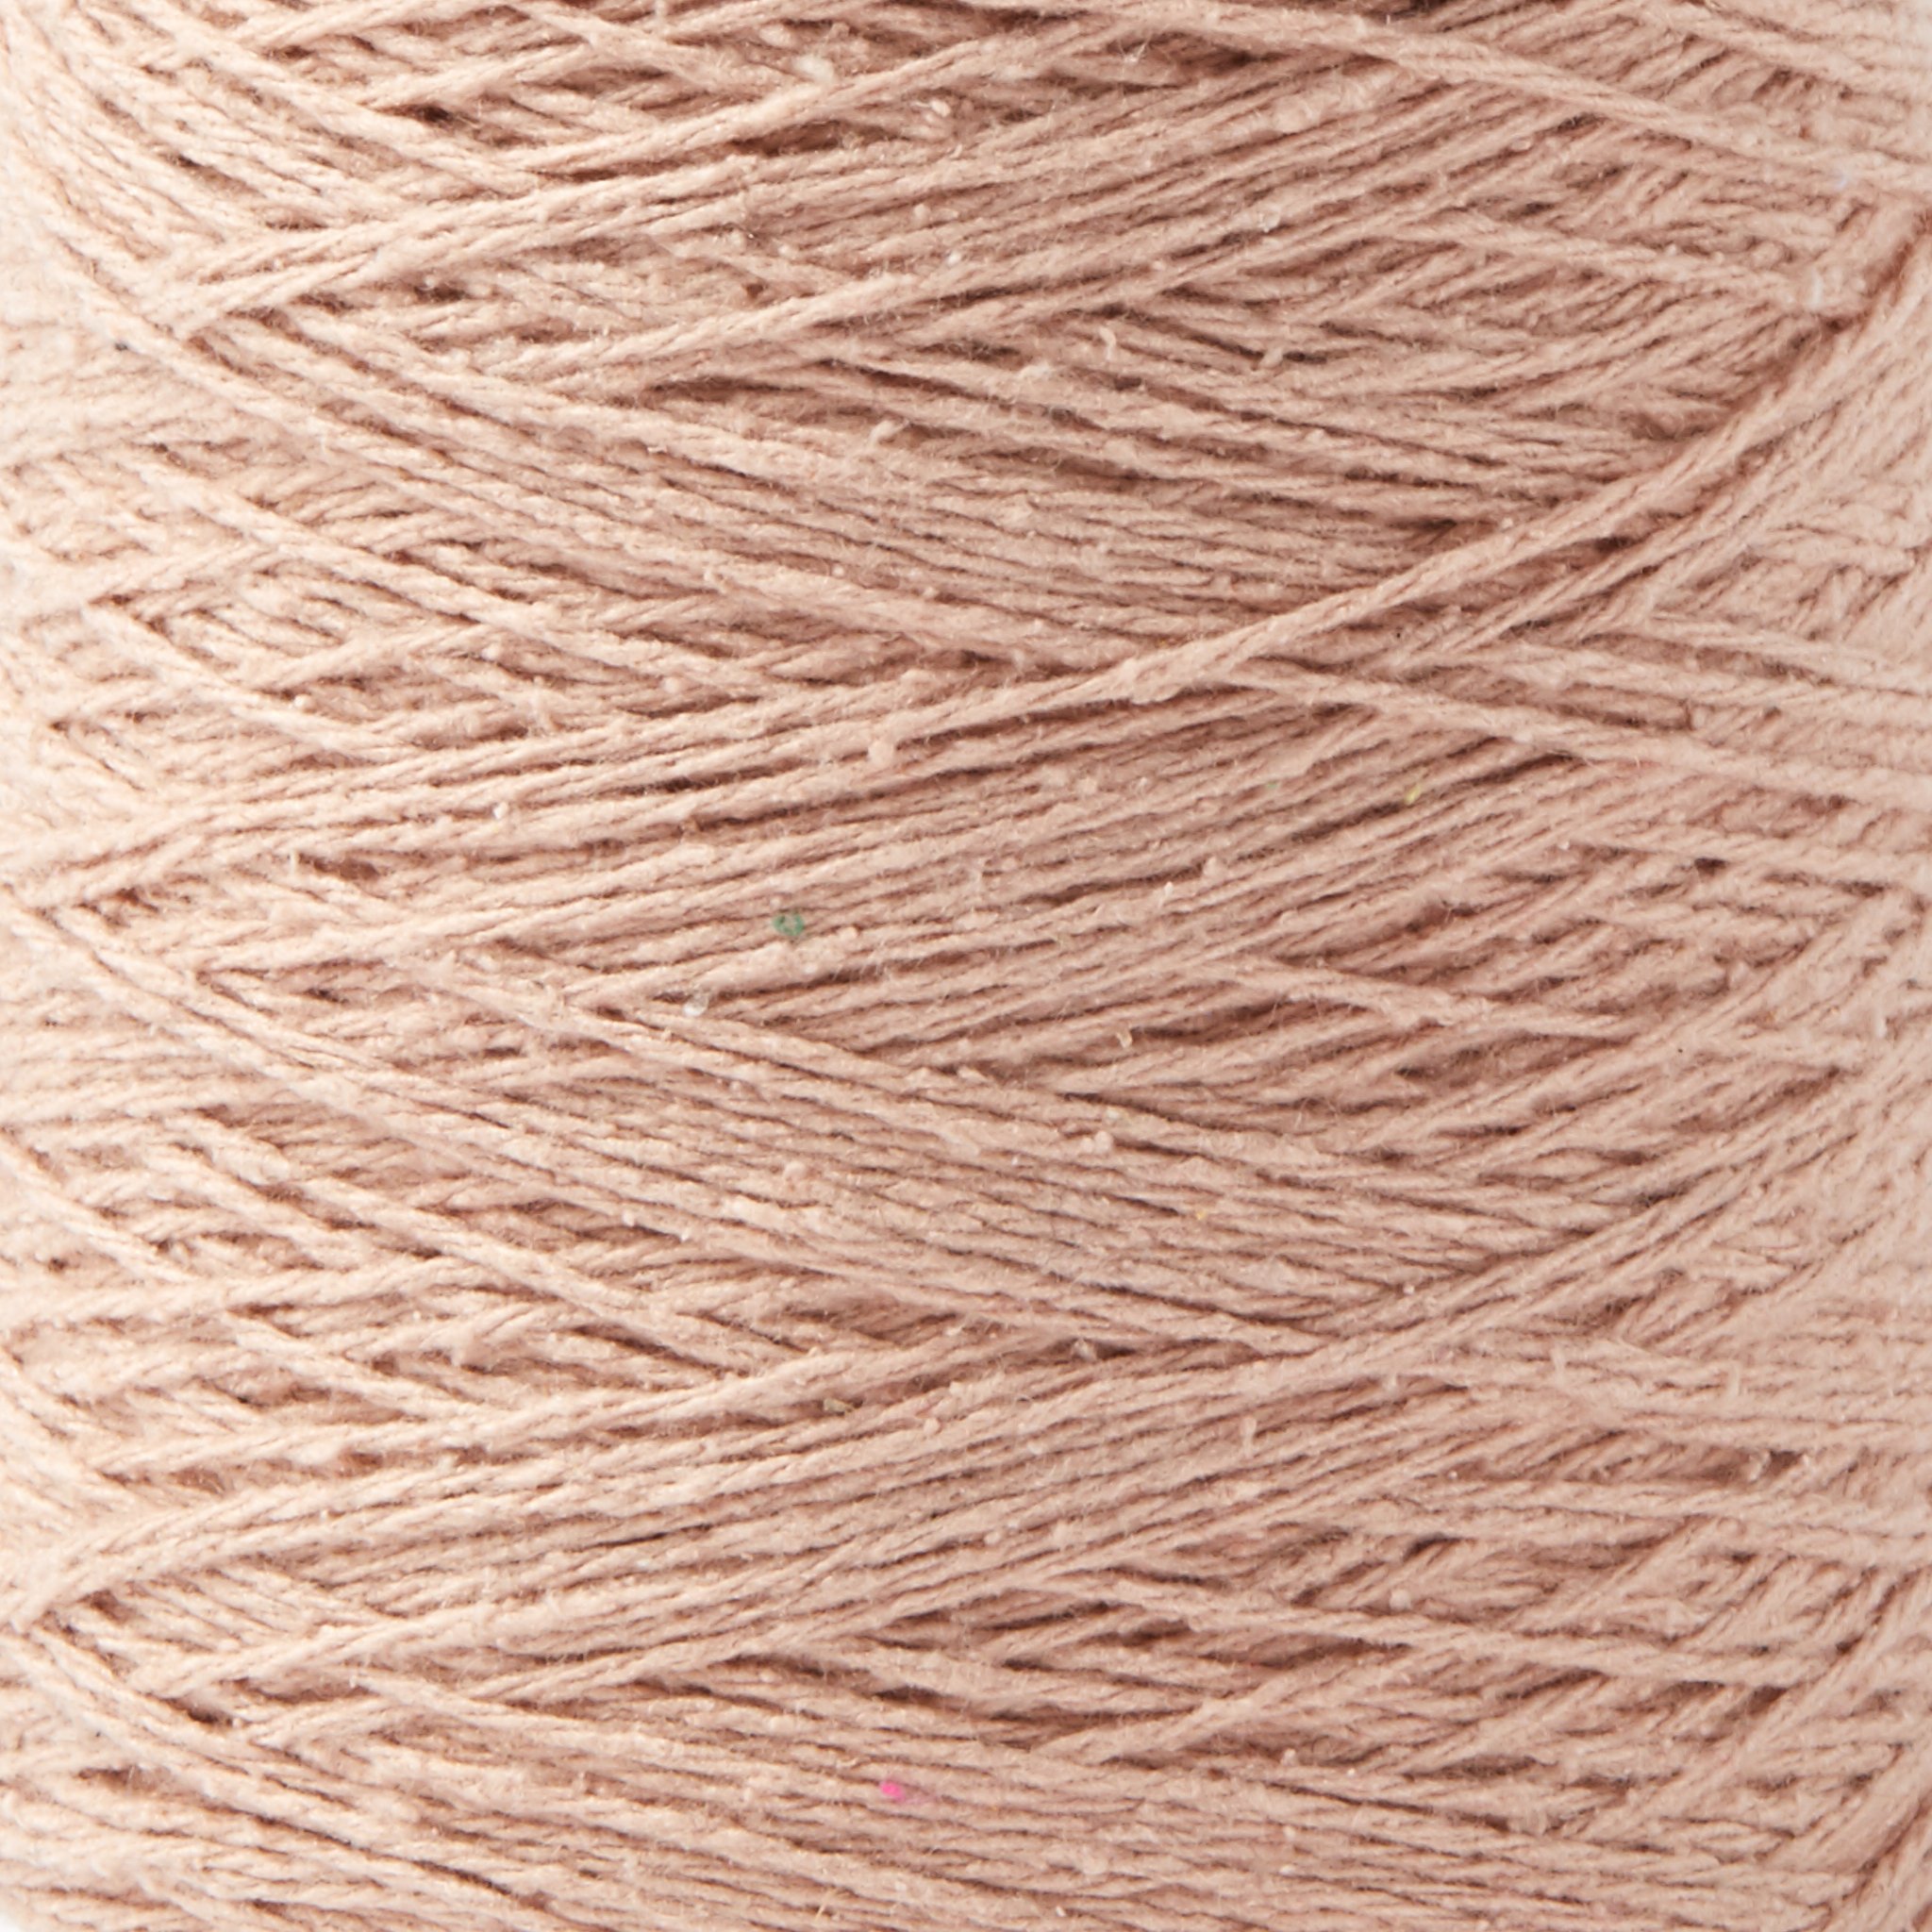 Silk noil and wool – Broad in the seams